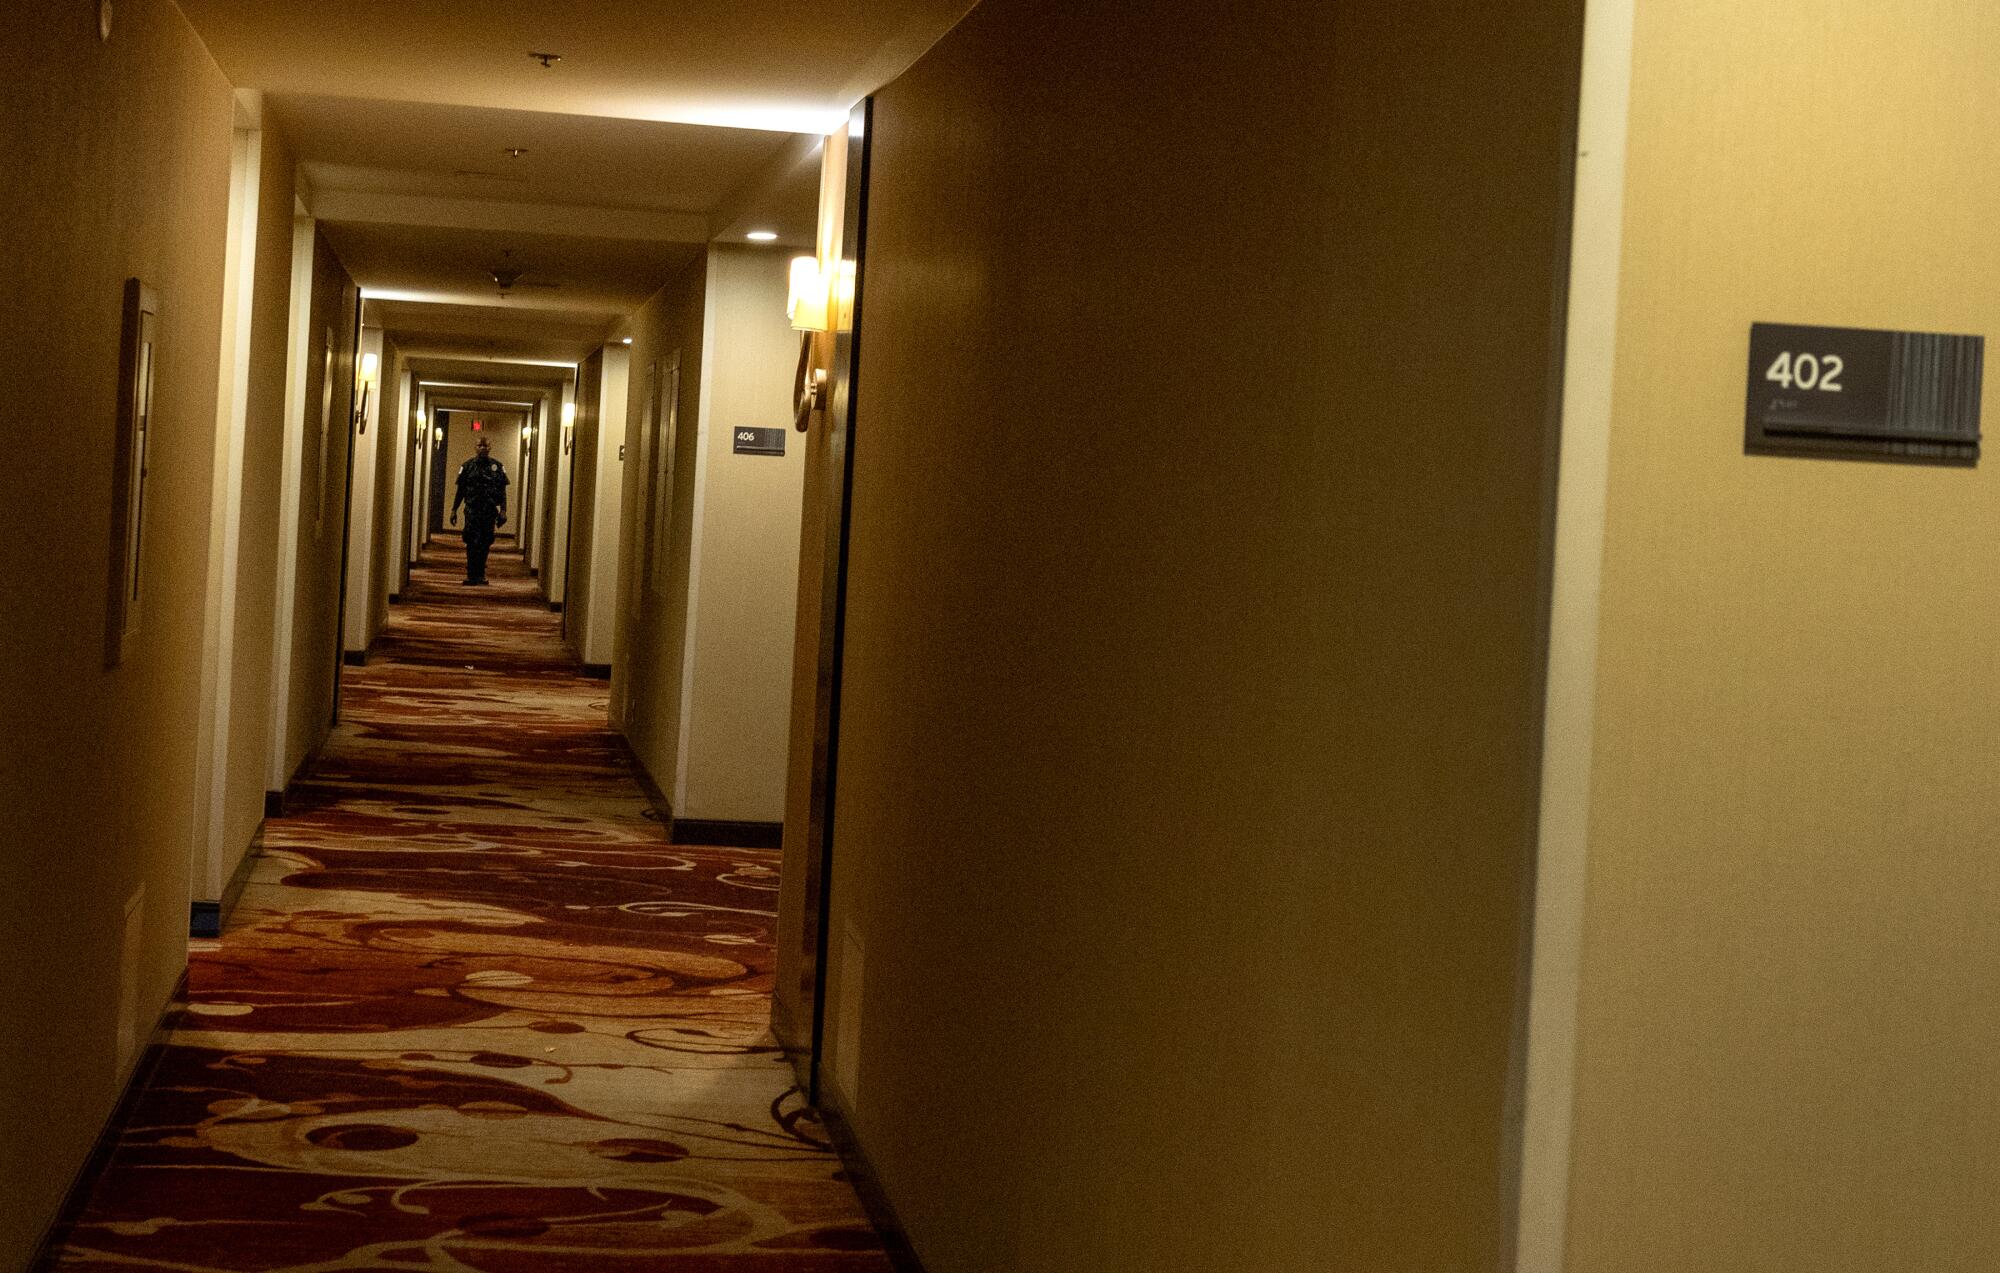 A security guard patrols the carpeted halls of the L.A. Grand Hotel.